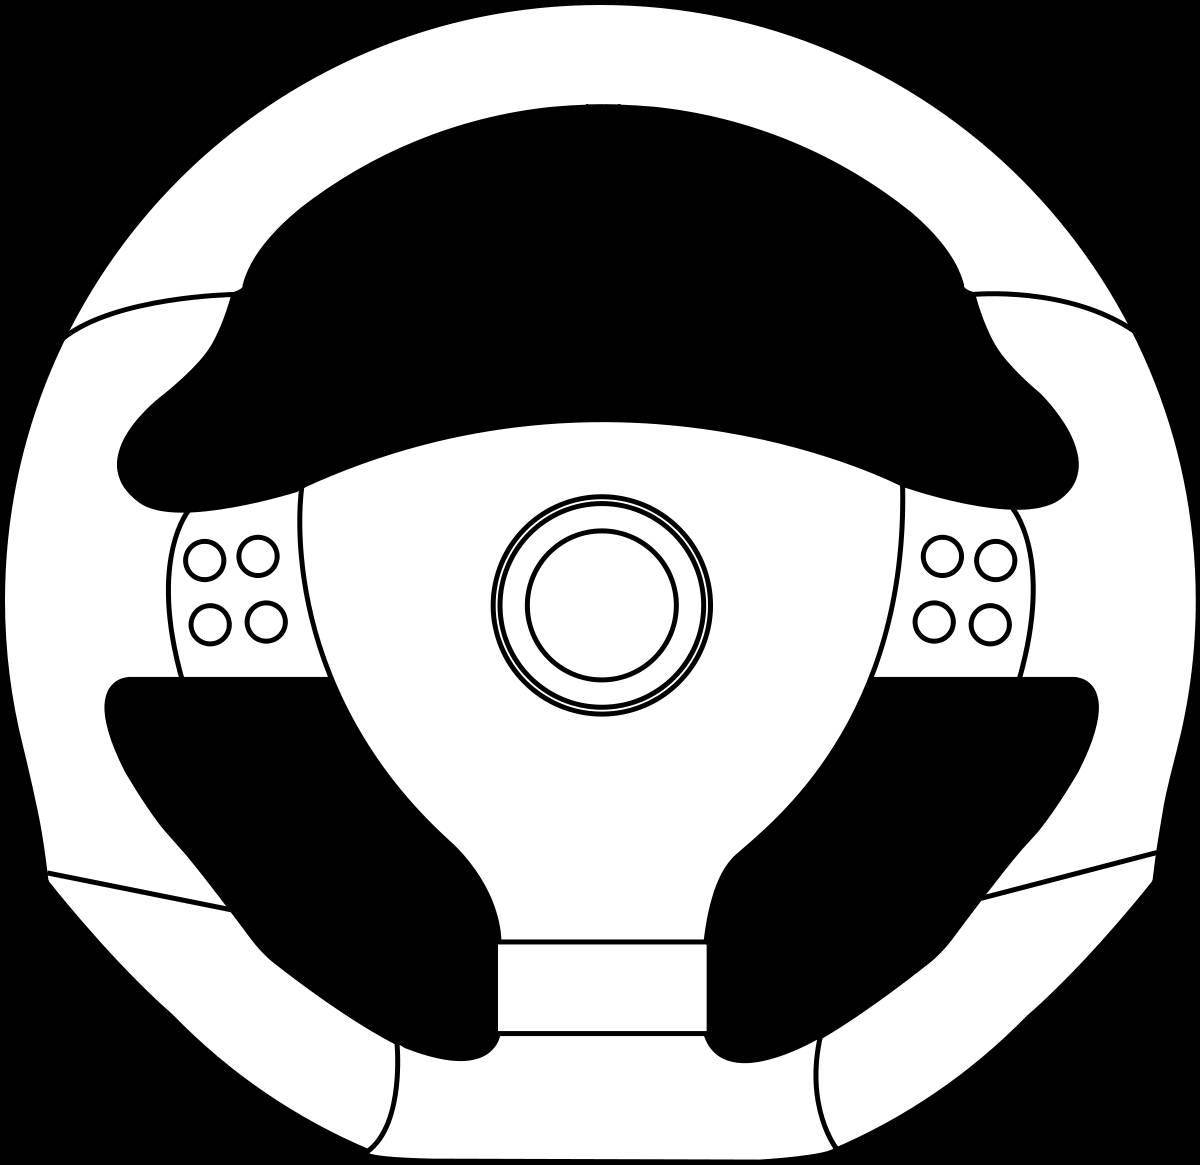 Gorgeous steering wheel coloring page